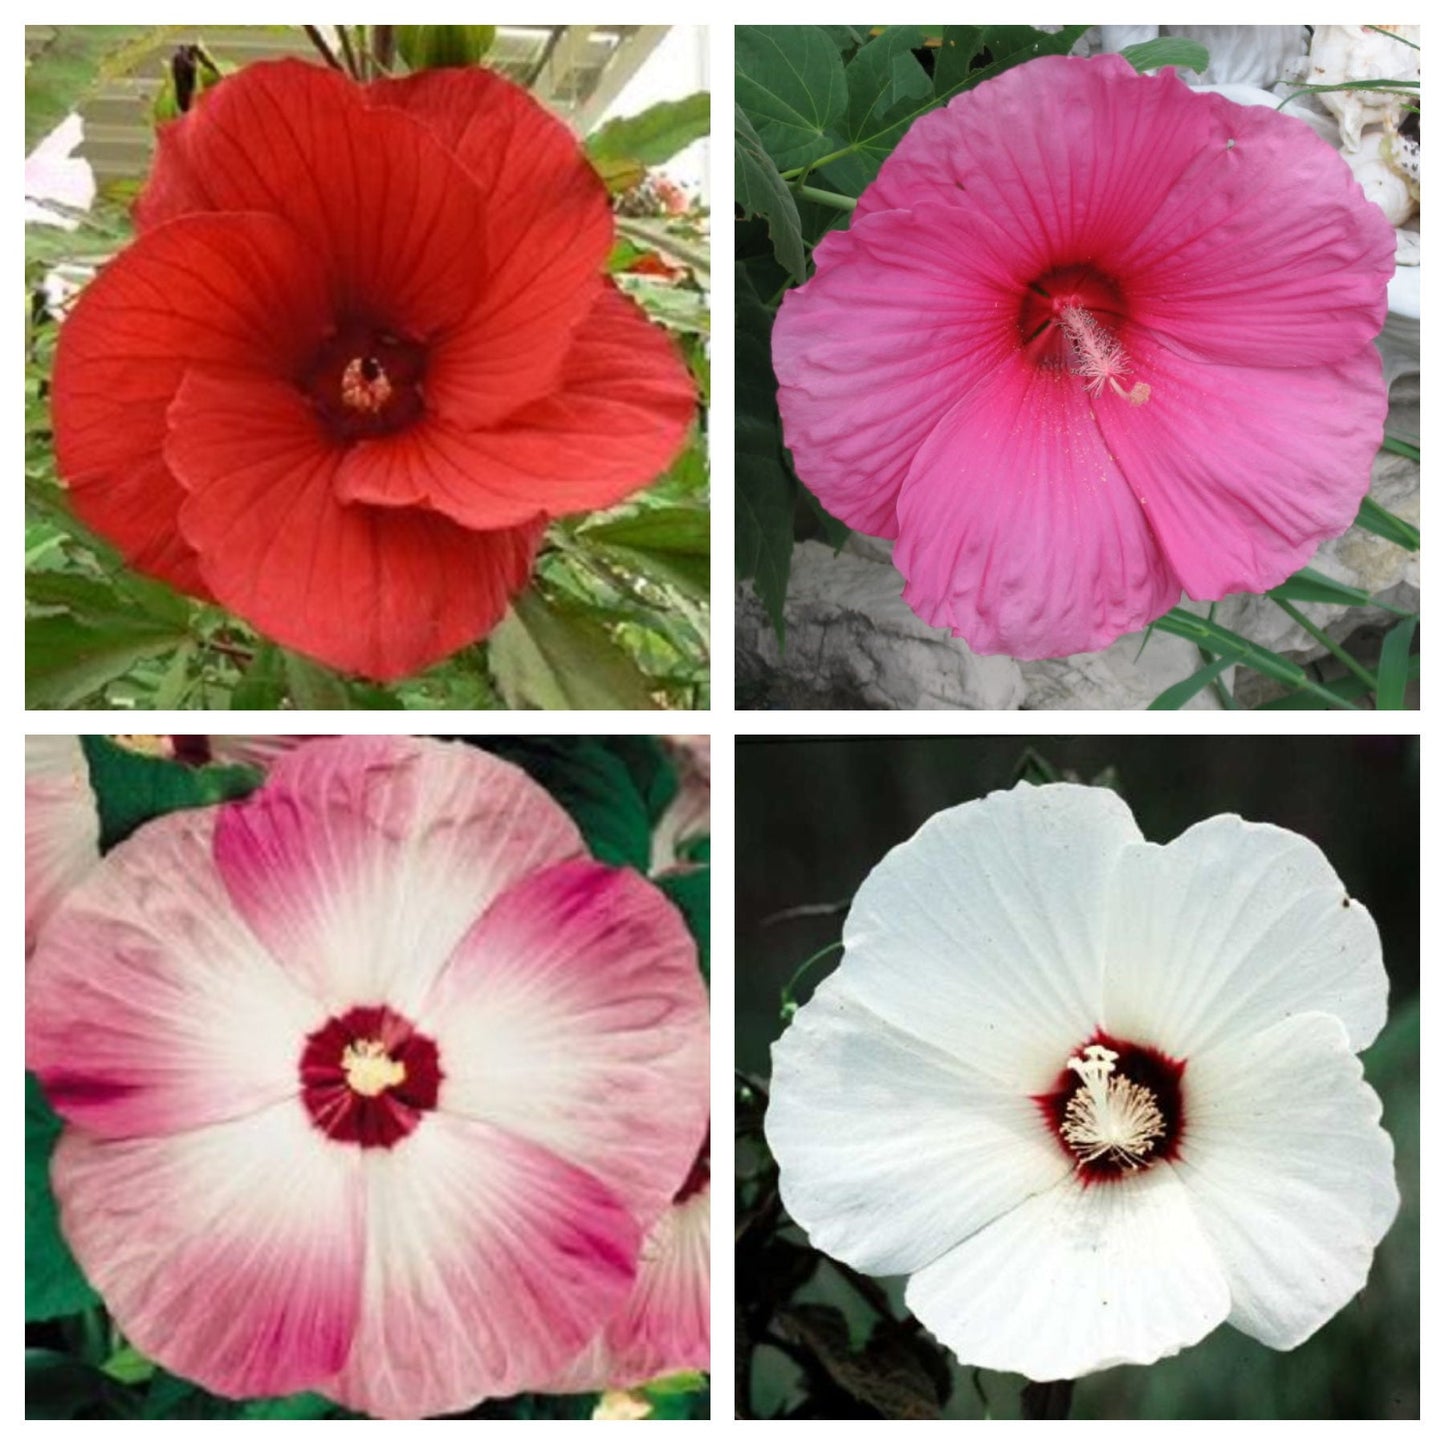 25 MIXED LUNA HIBISCUS Moscheutos Hardy Mixed Colors - Red, Hot Pink, Pink & White Swirl, and White Flower Seeds